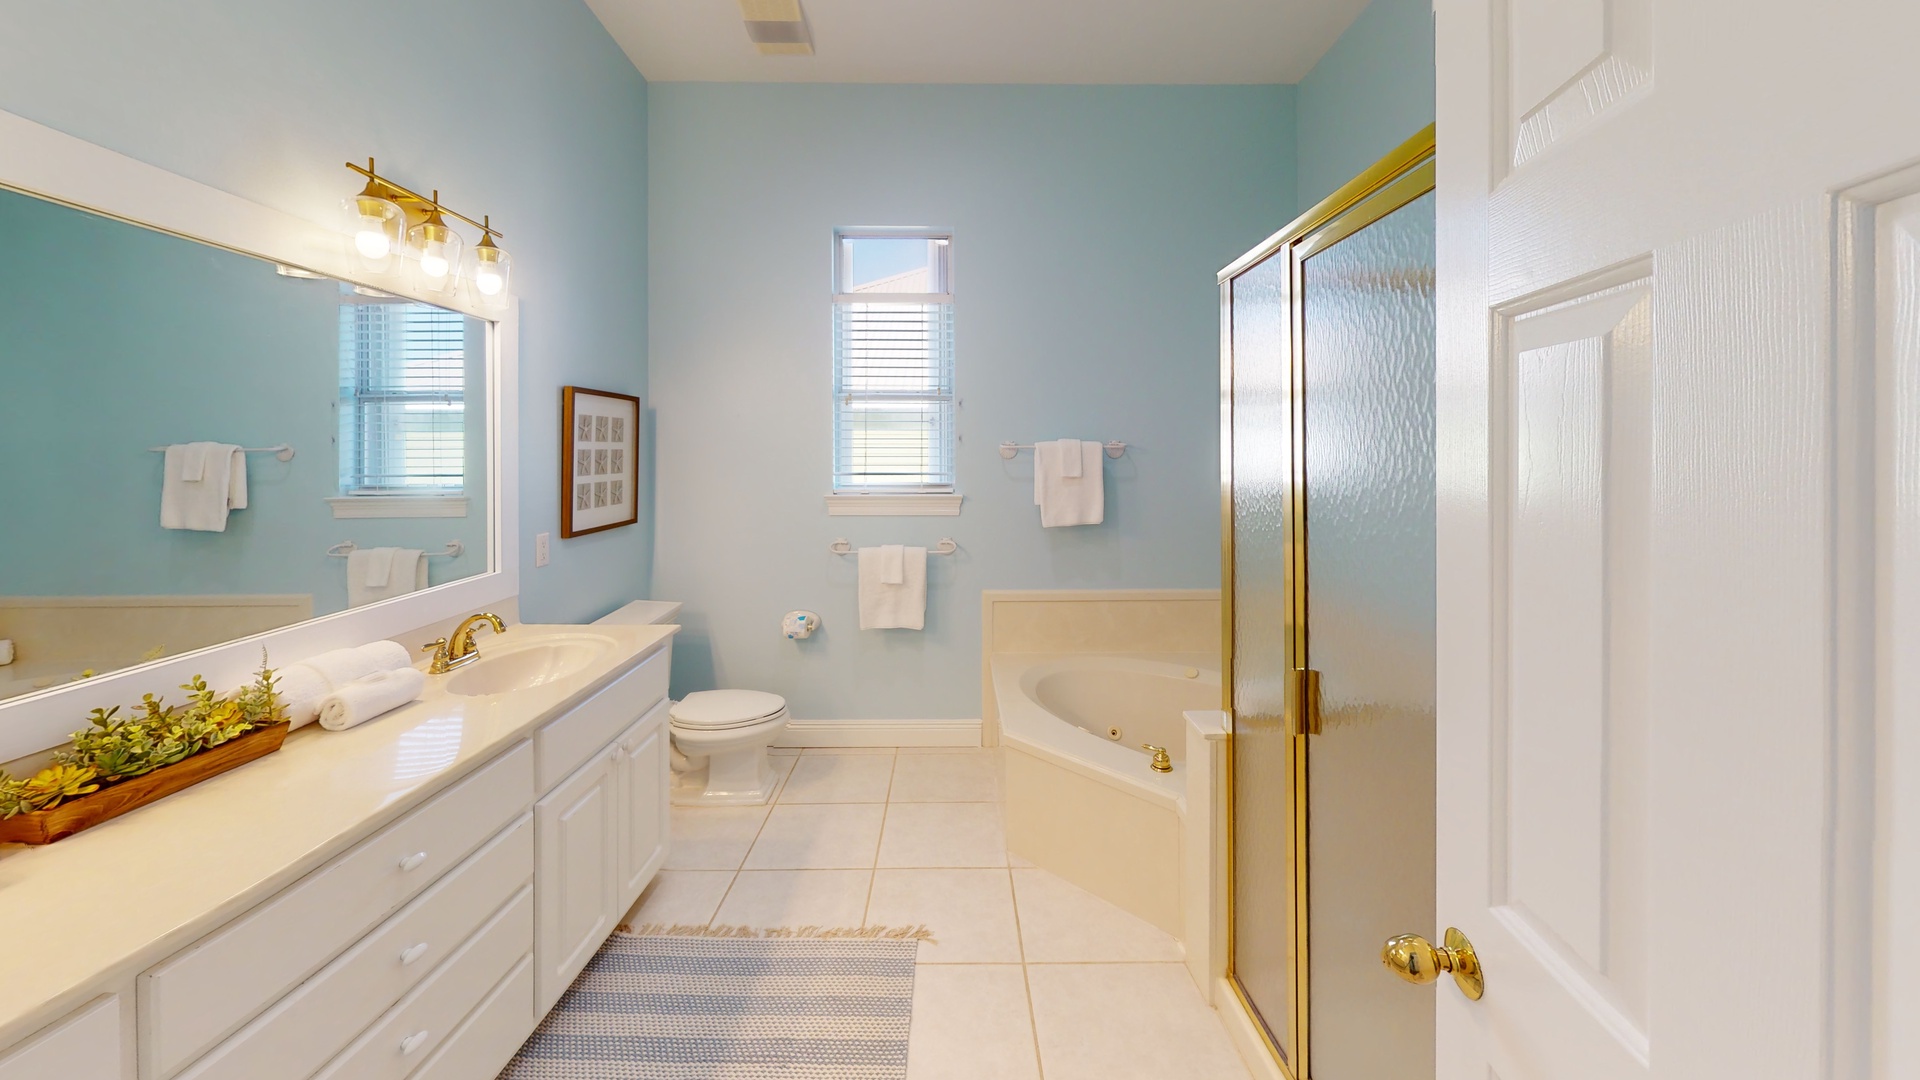 Master bathroom features a double vanity, jacuzzi tub and walk-in shower